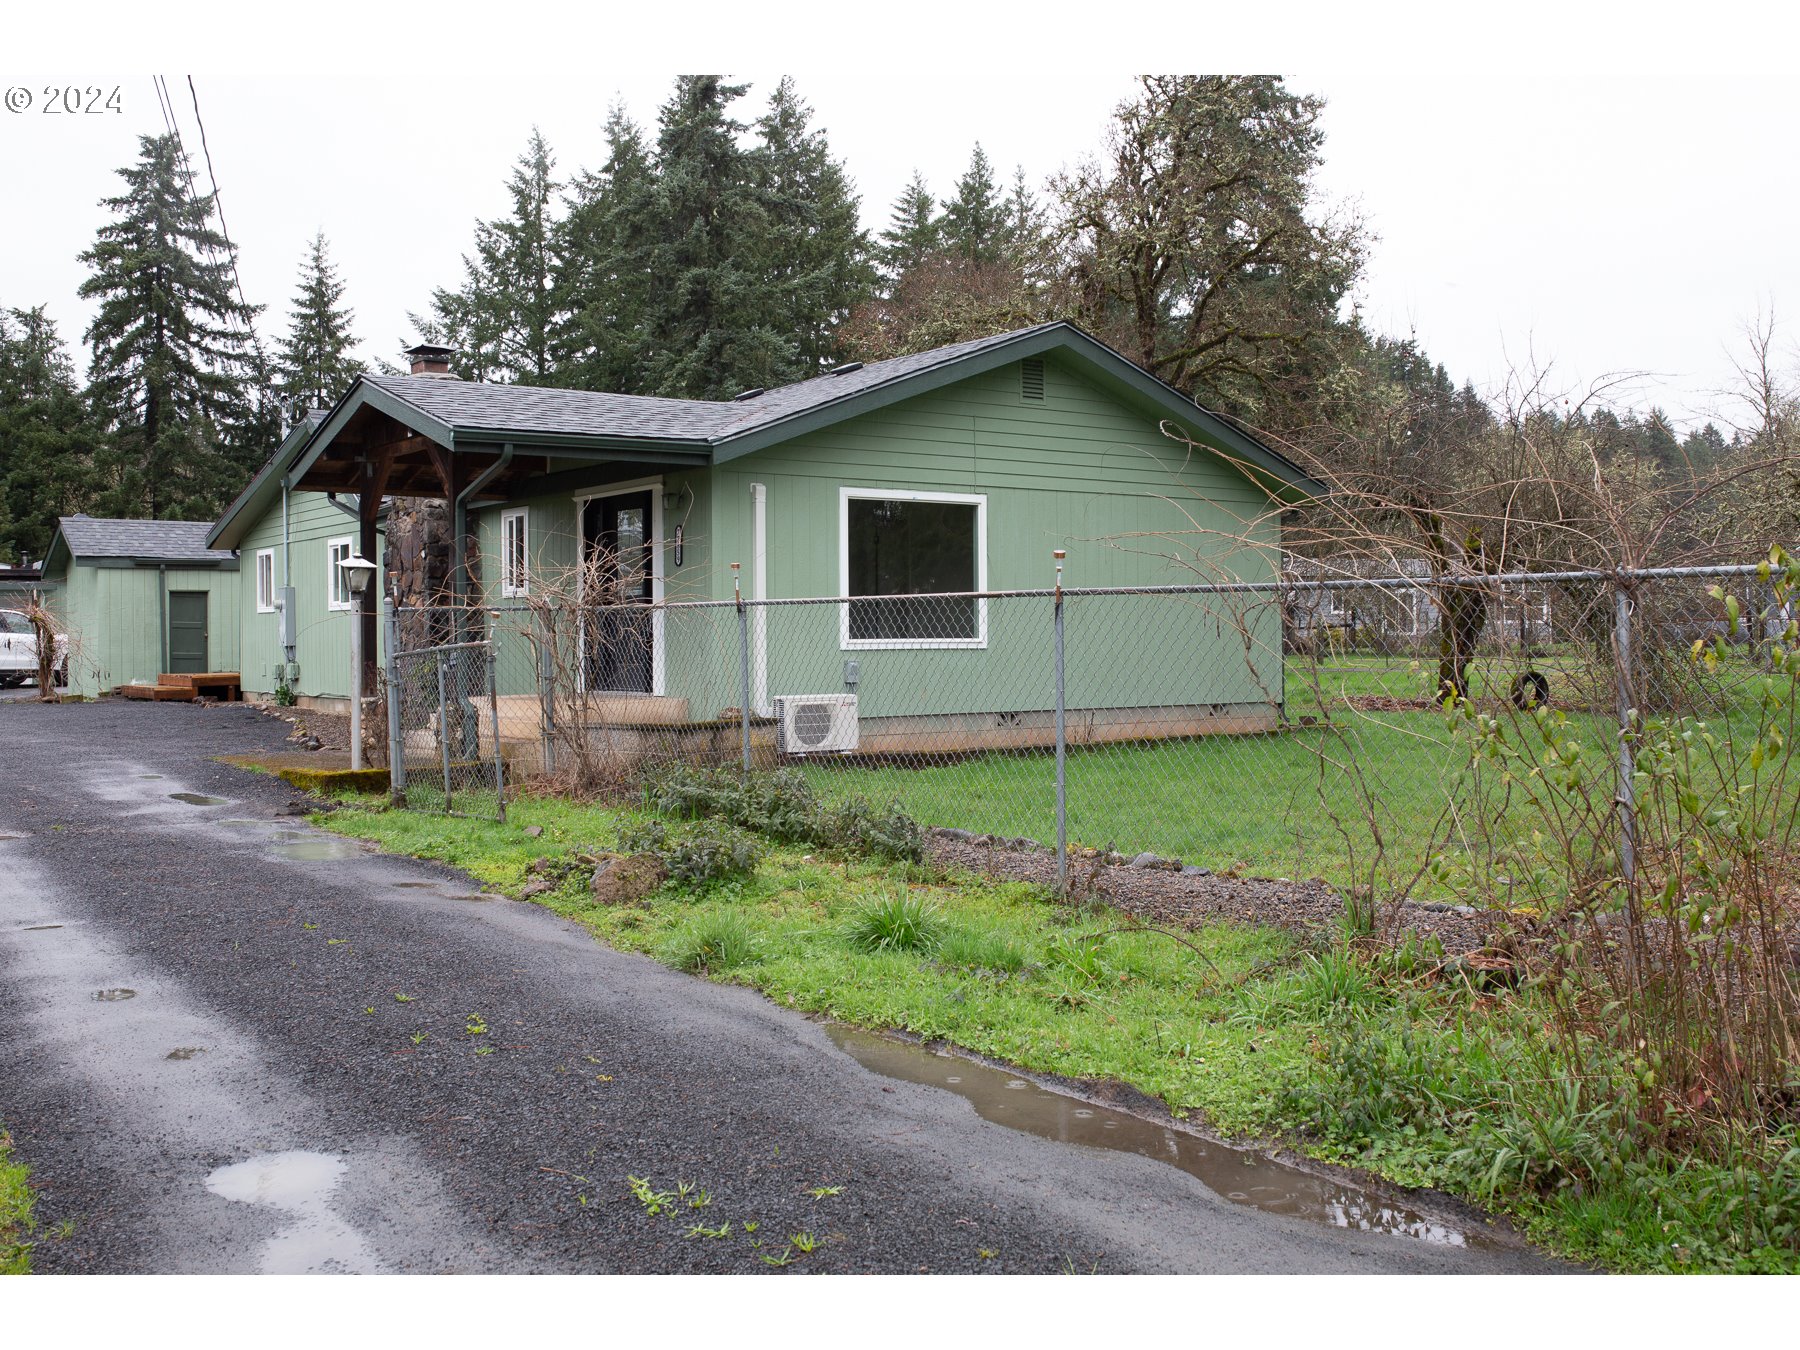 77859 MOSBY CREEK RD, Cottage Grove, OR 